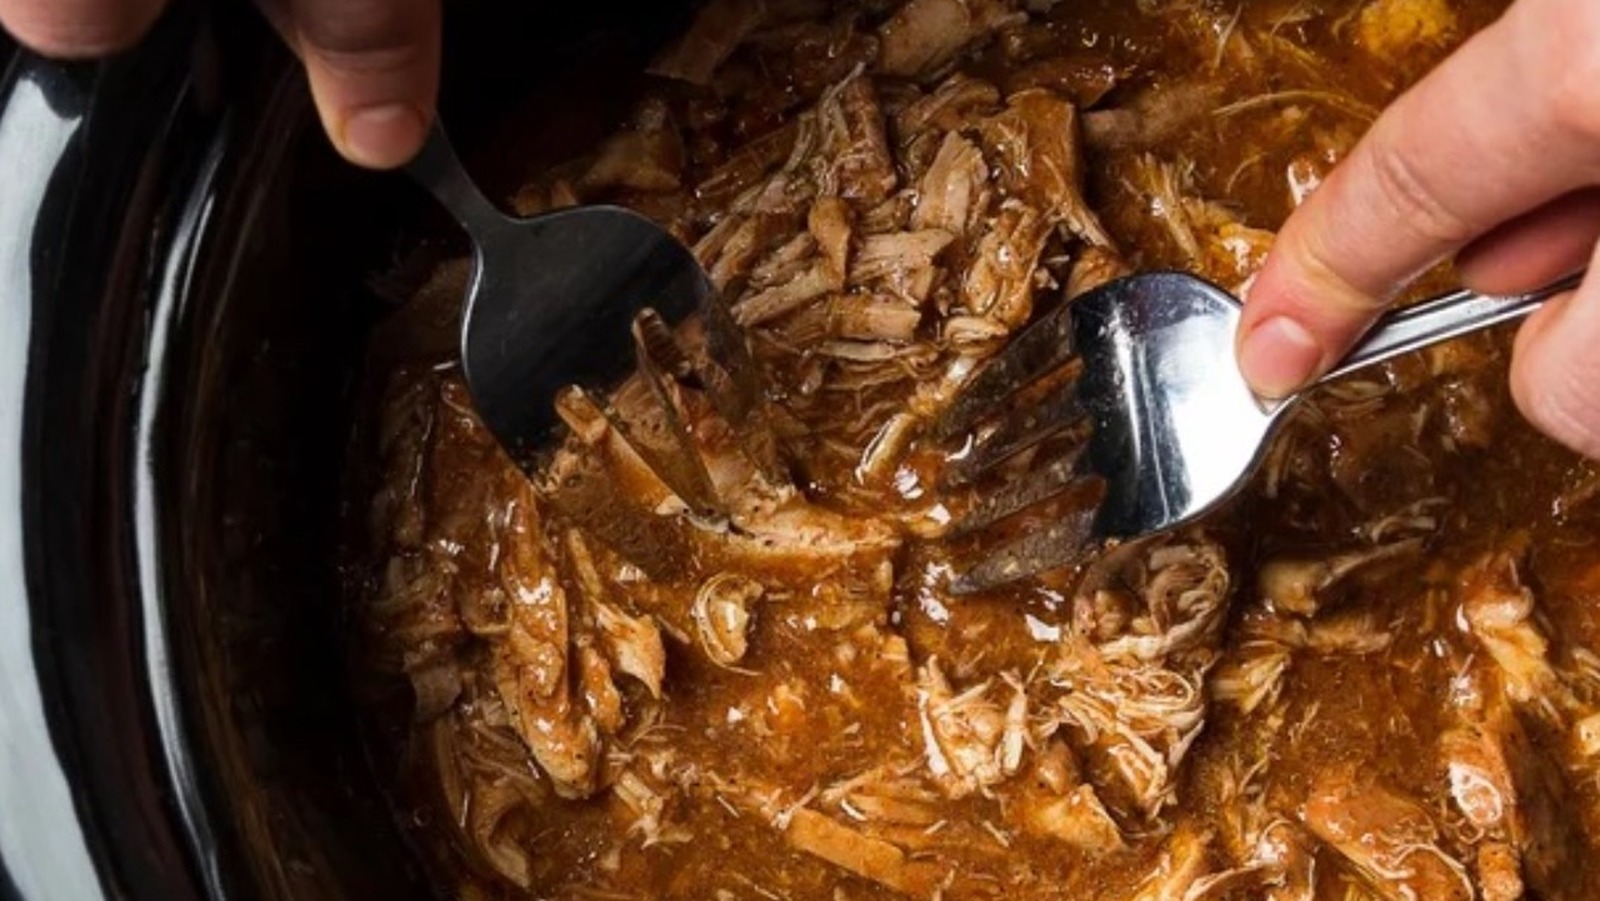 https://www.tastingtable.com/img/gallery/11-slow-cooker-meals-perfect-for-busy-nights/l-intro-1647449777.jpg